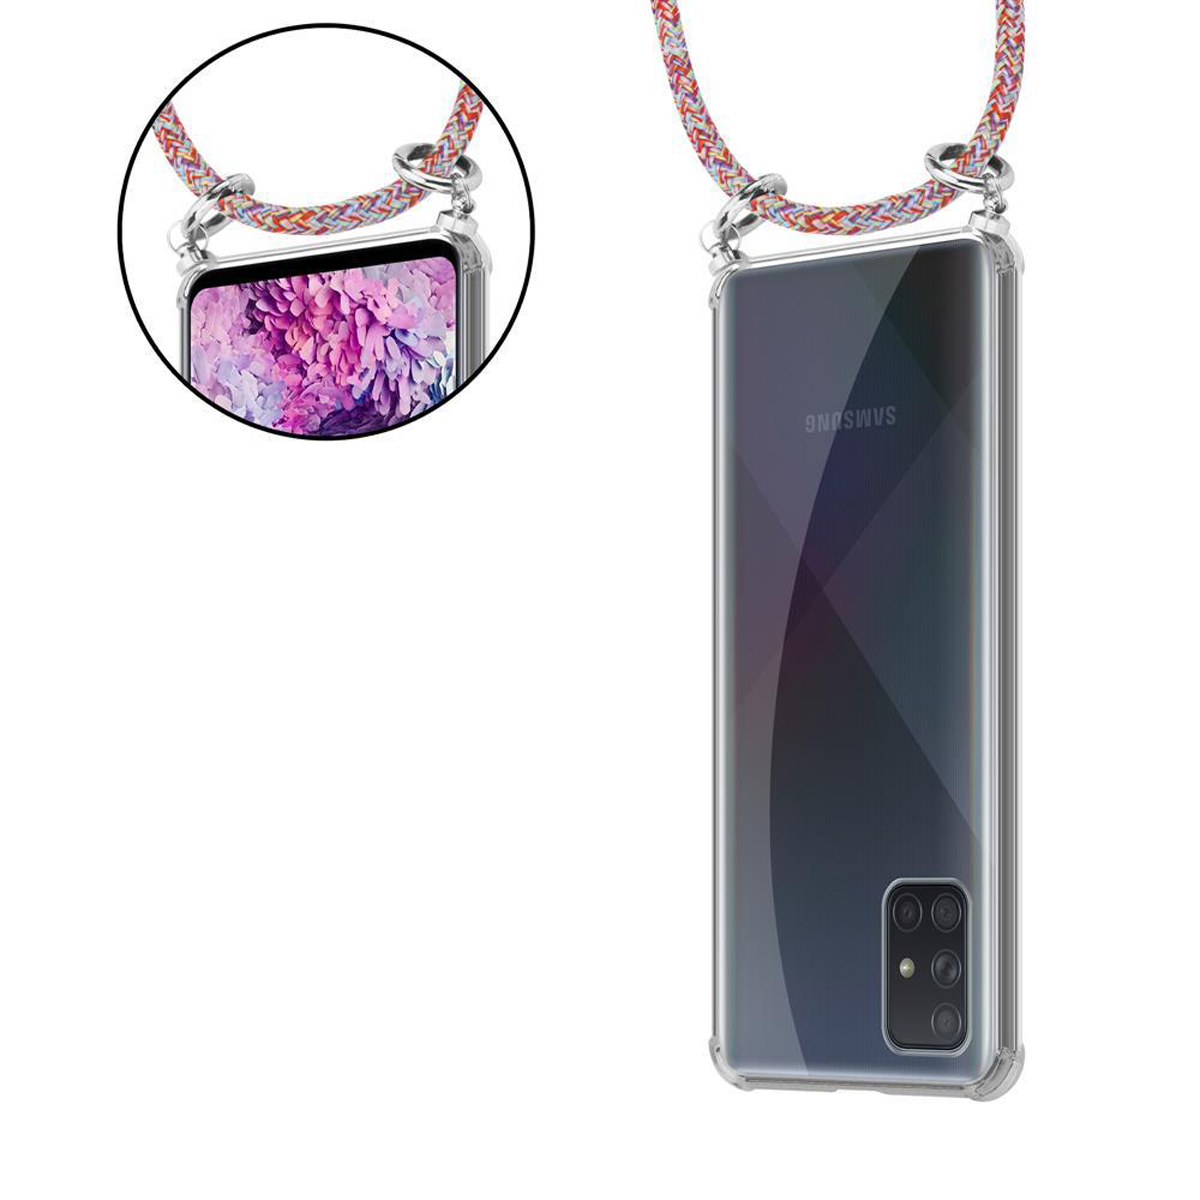 Ringen, CADORABO Backcover, Kordel abnehmbarer Band Hülle, Galaxy Silber COLORFUL Samsung, und A71 4G, PARROT Kette mit Handy